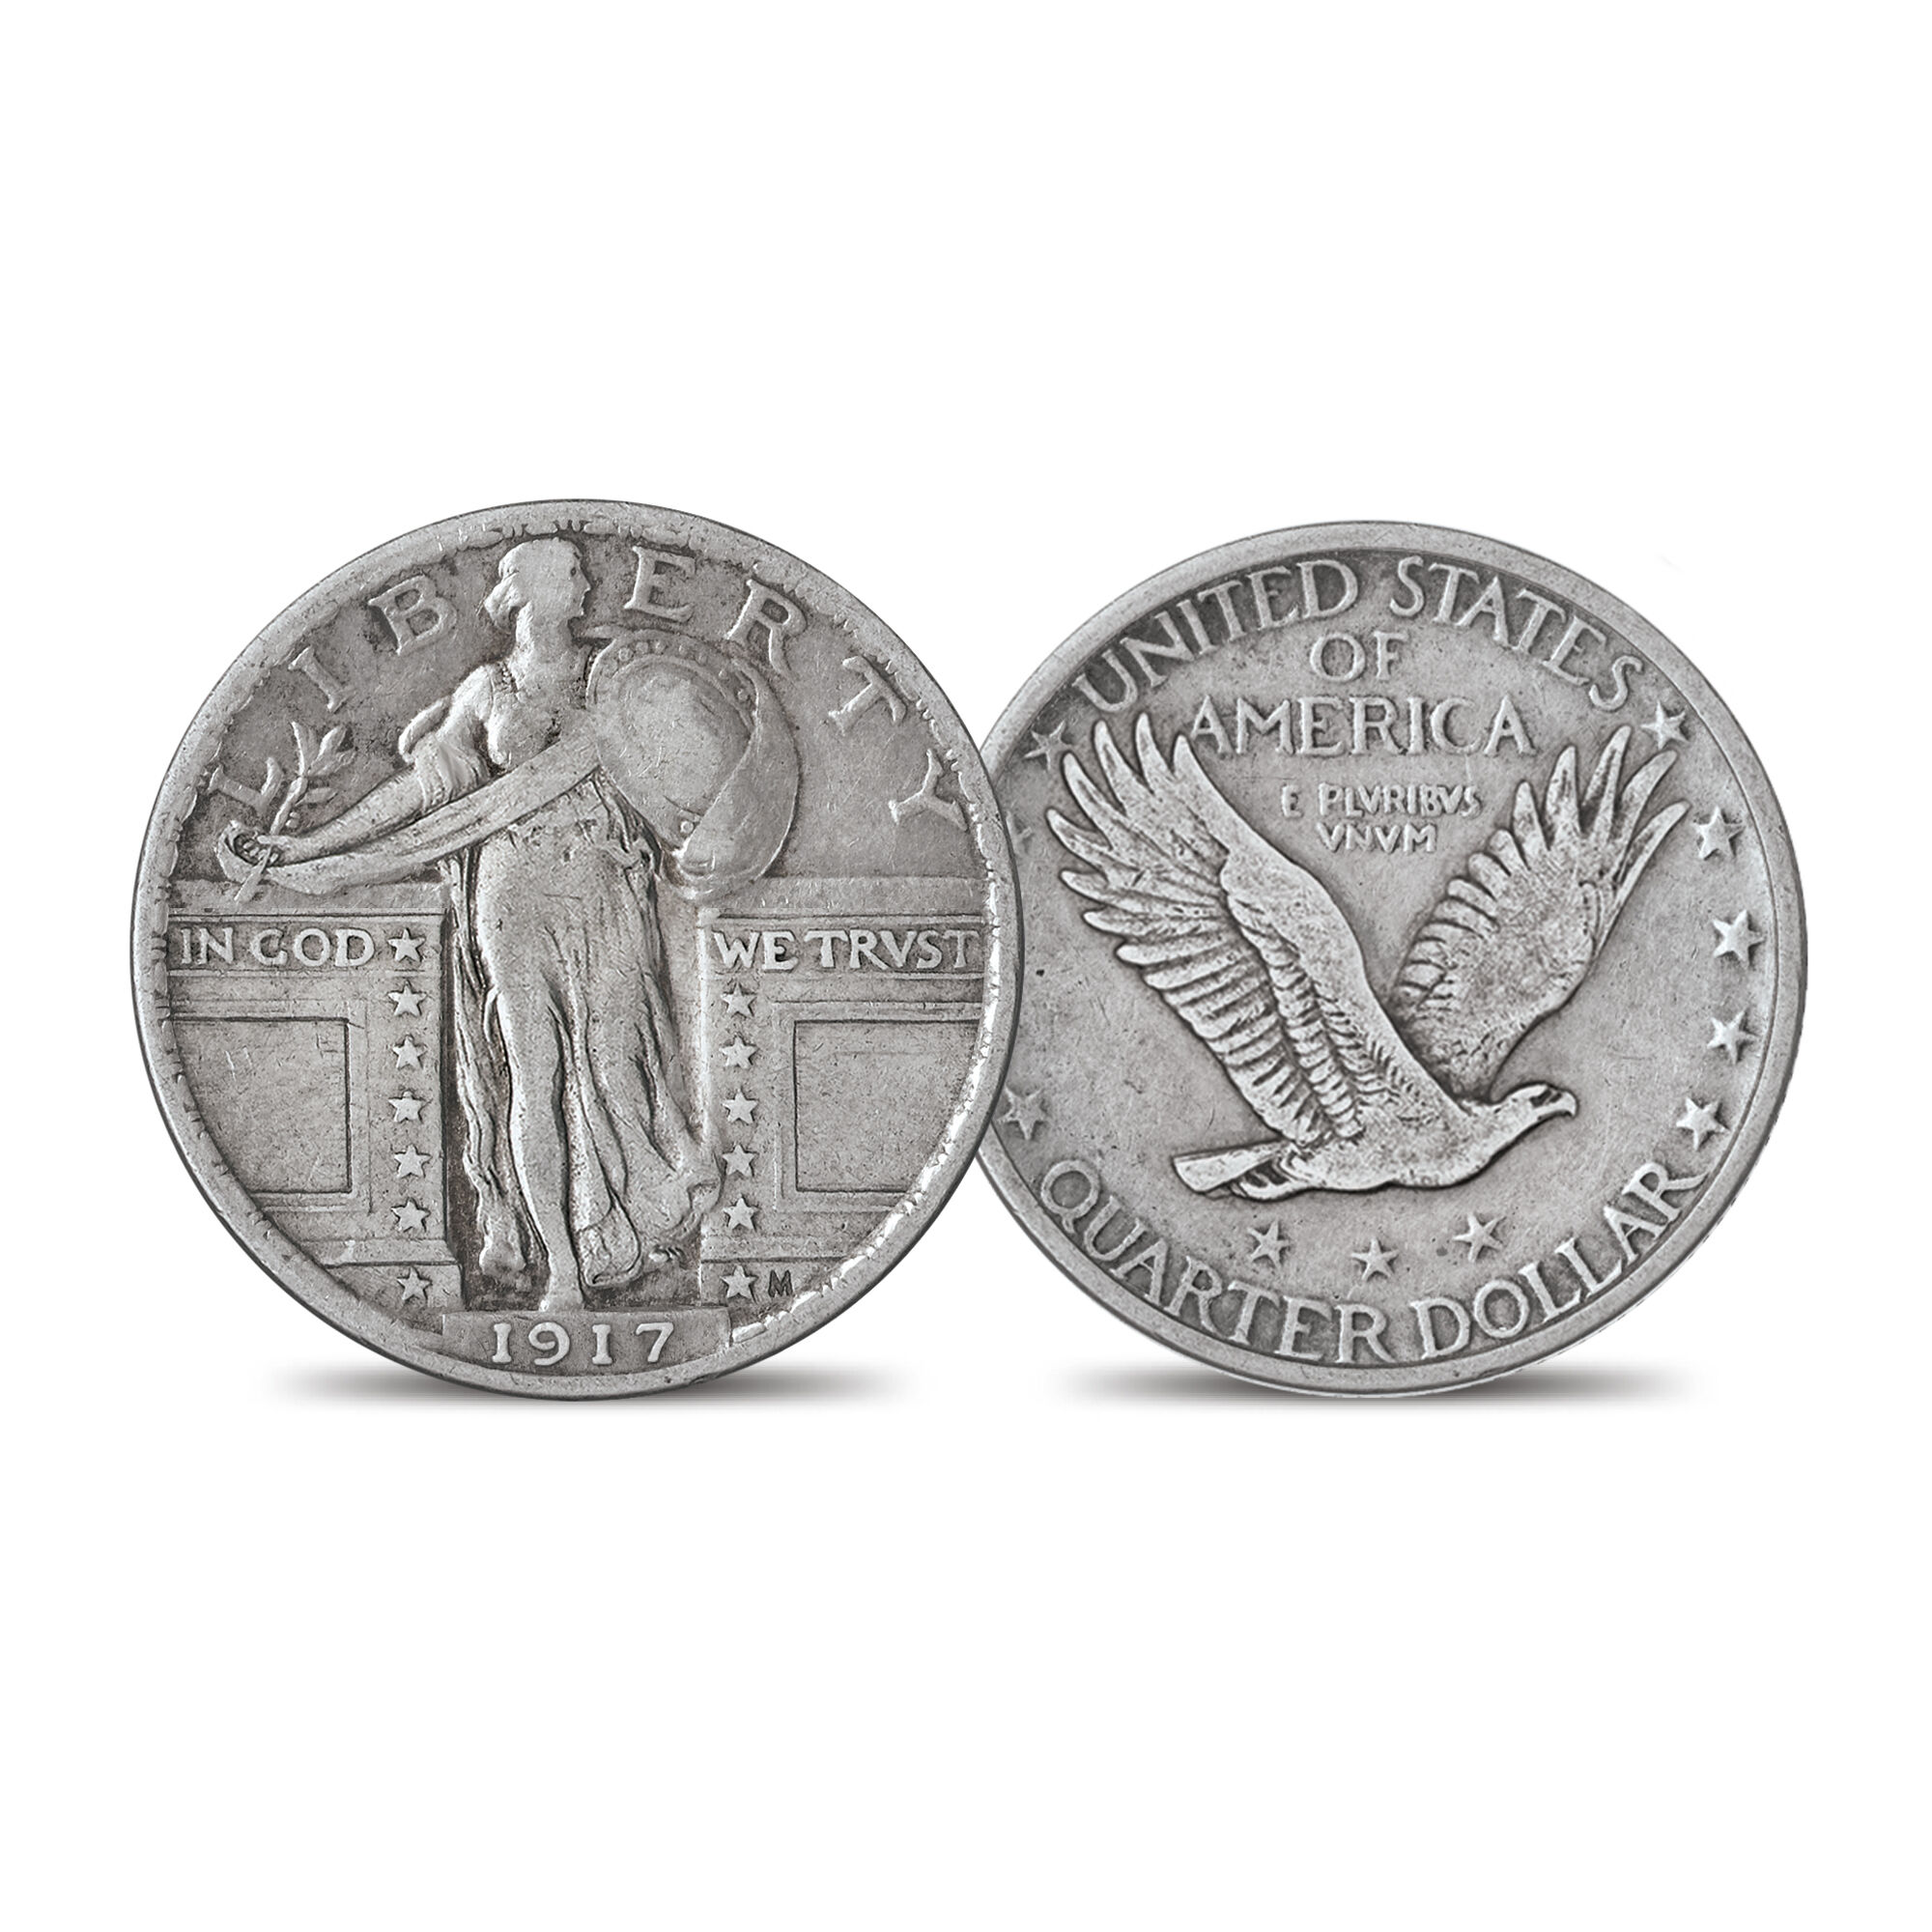 The 1917 Standing Liberty Silver Quarter Set 6811 0014 c type two